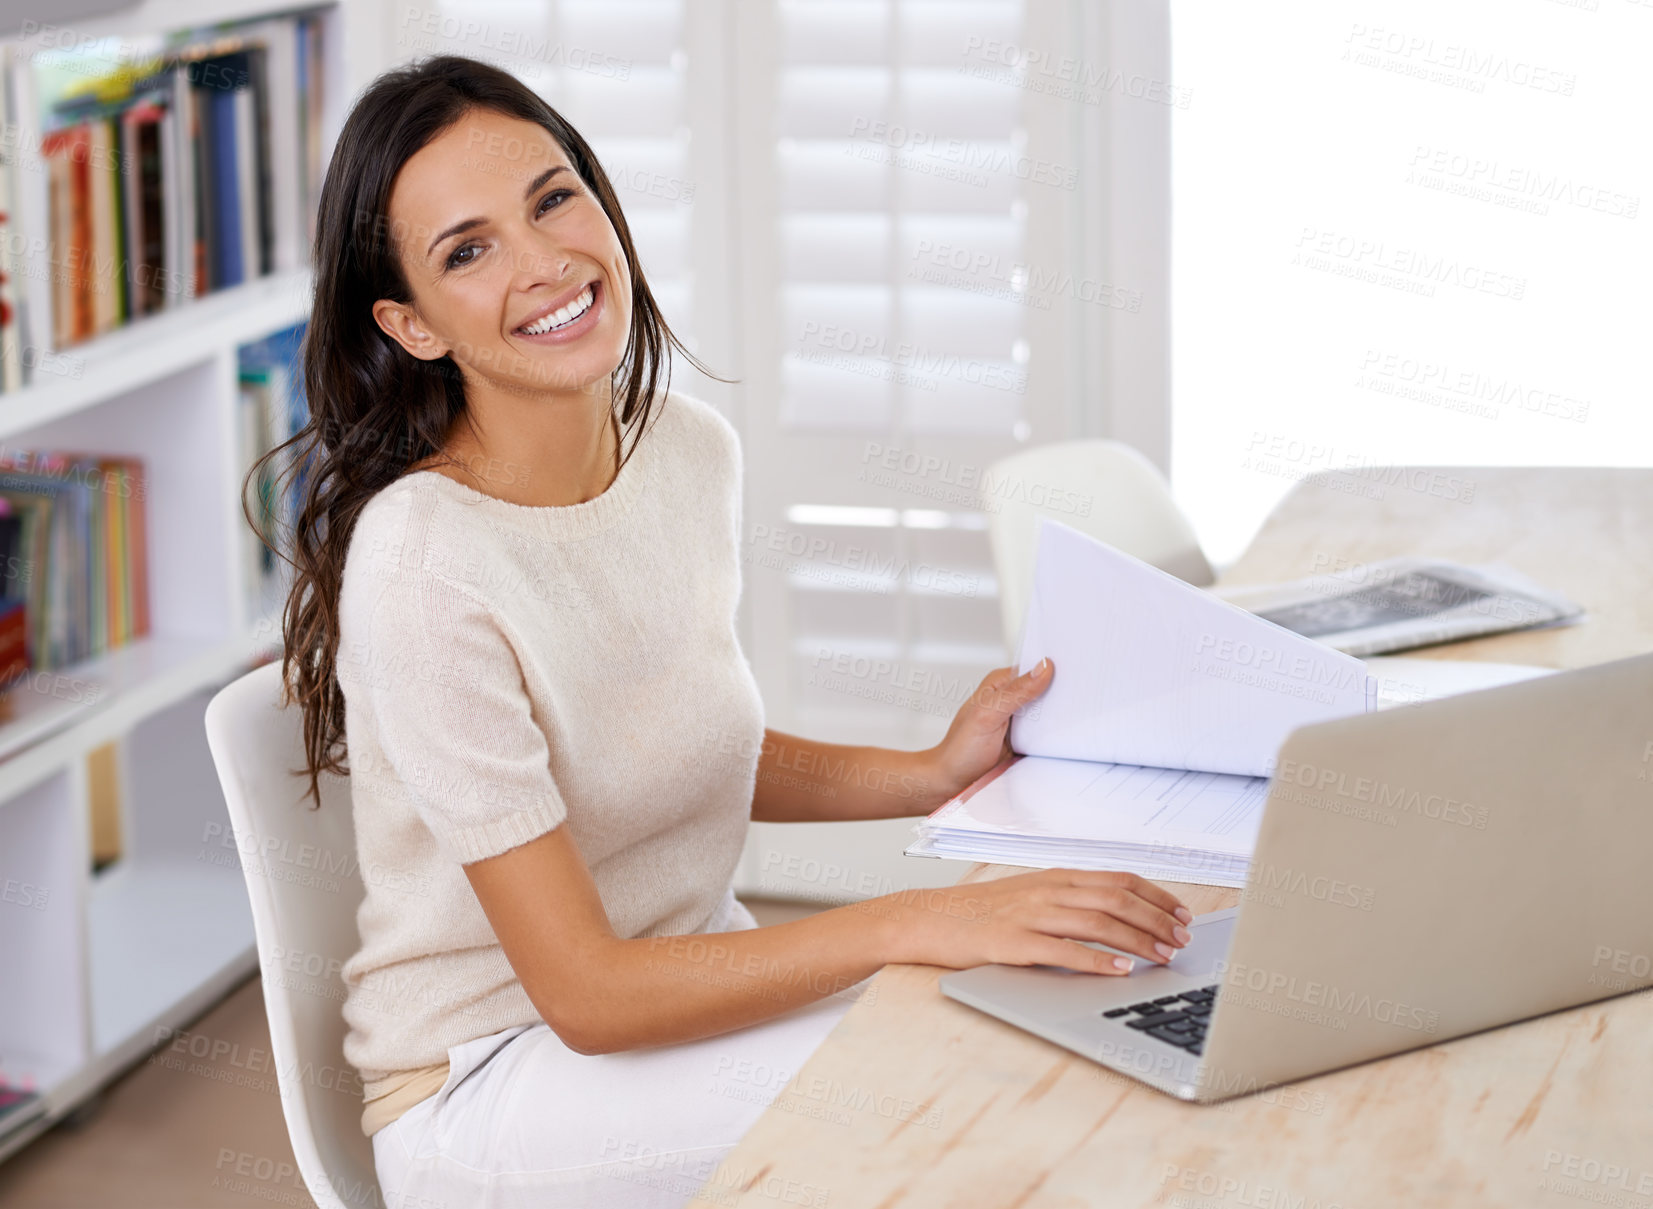 Buy stock photo Documents, smile and portrait of woman with laptop working on creative project at home office. Happy, technology and female freelance designer with paperwork and computer in workspace at apartment.